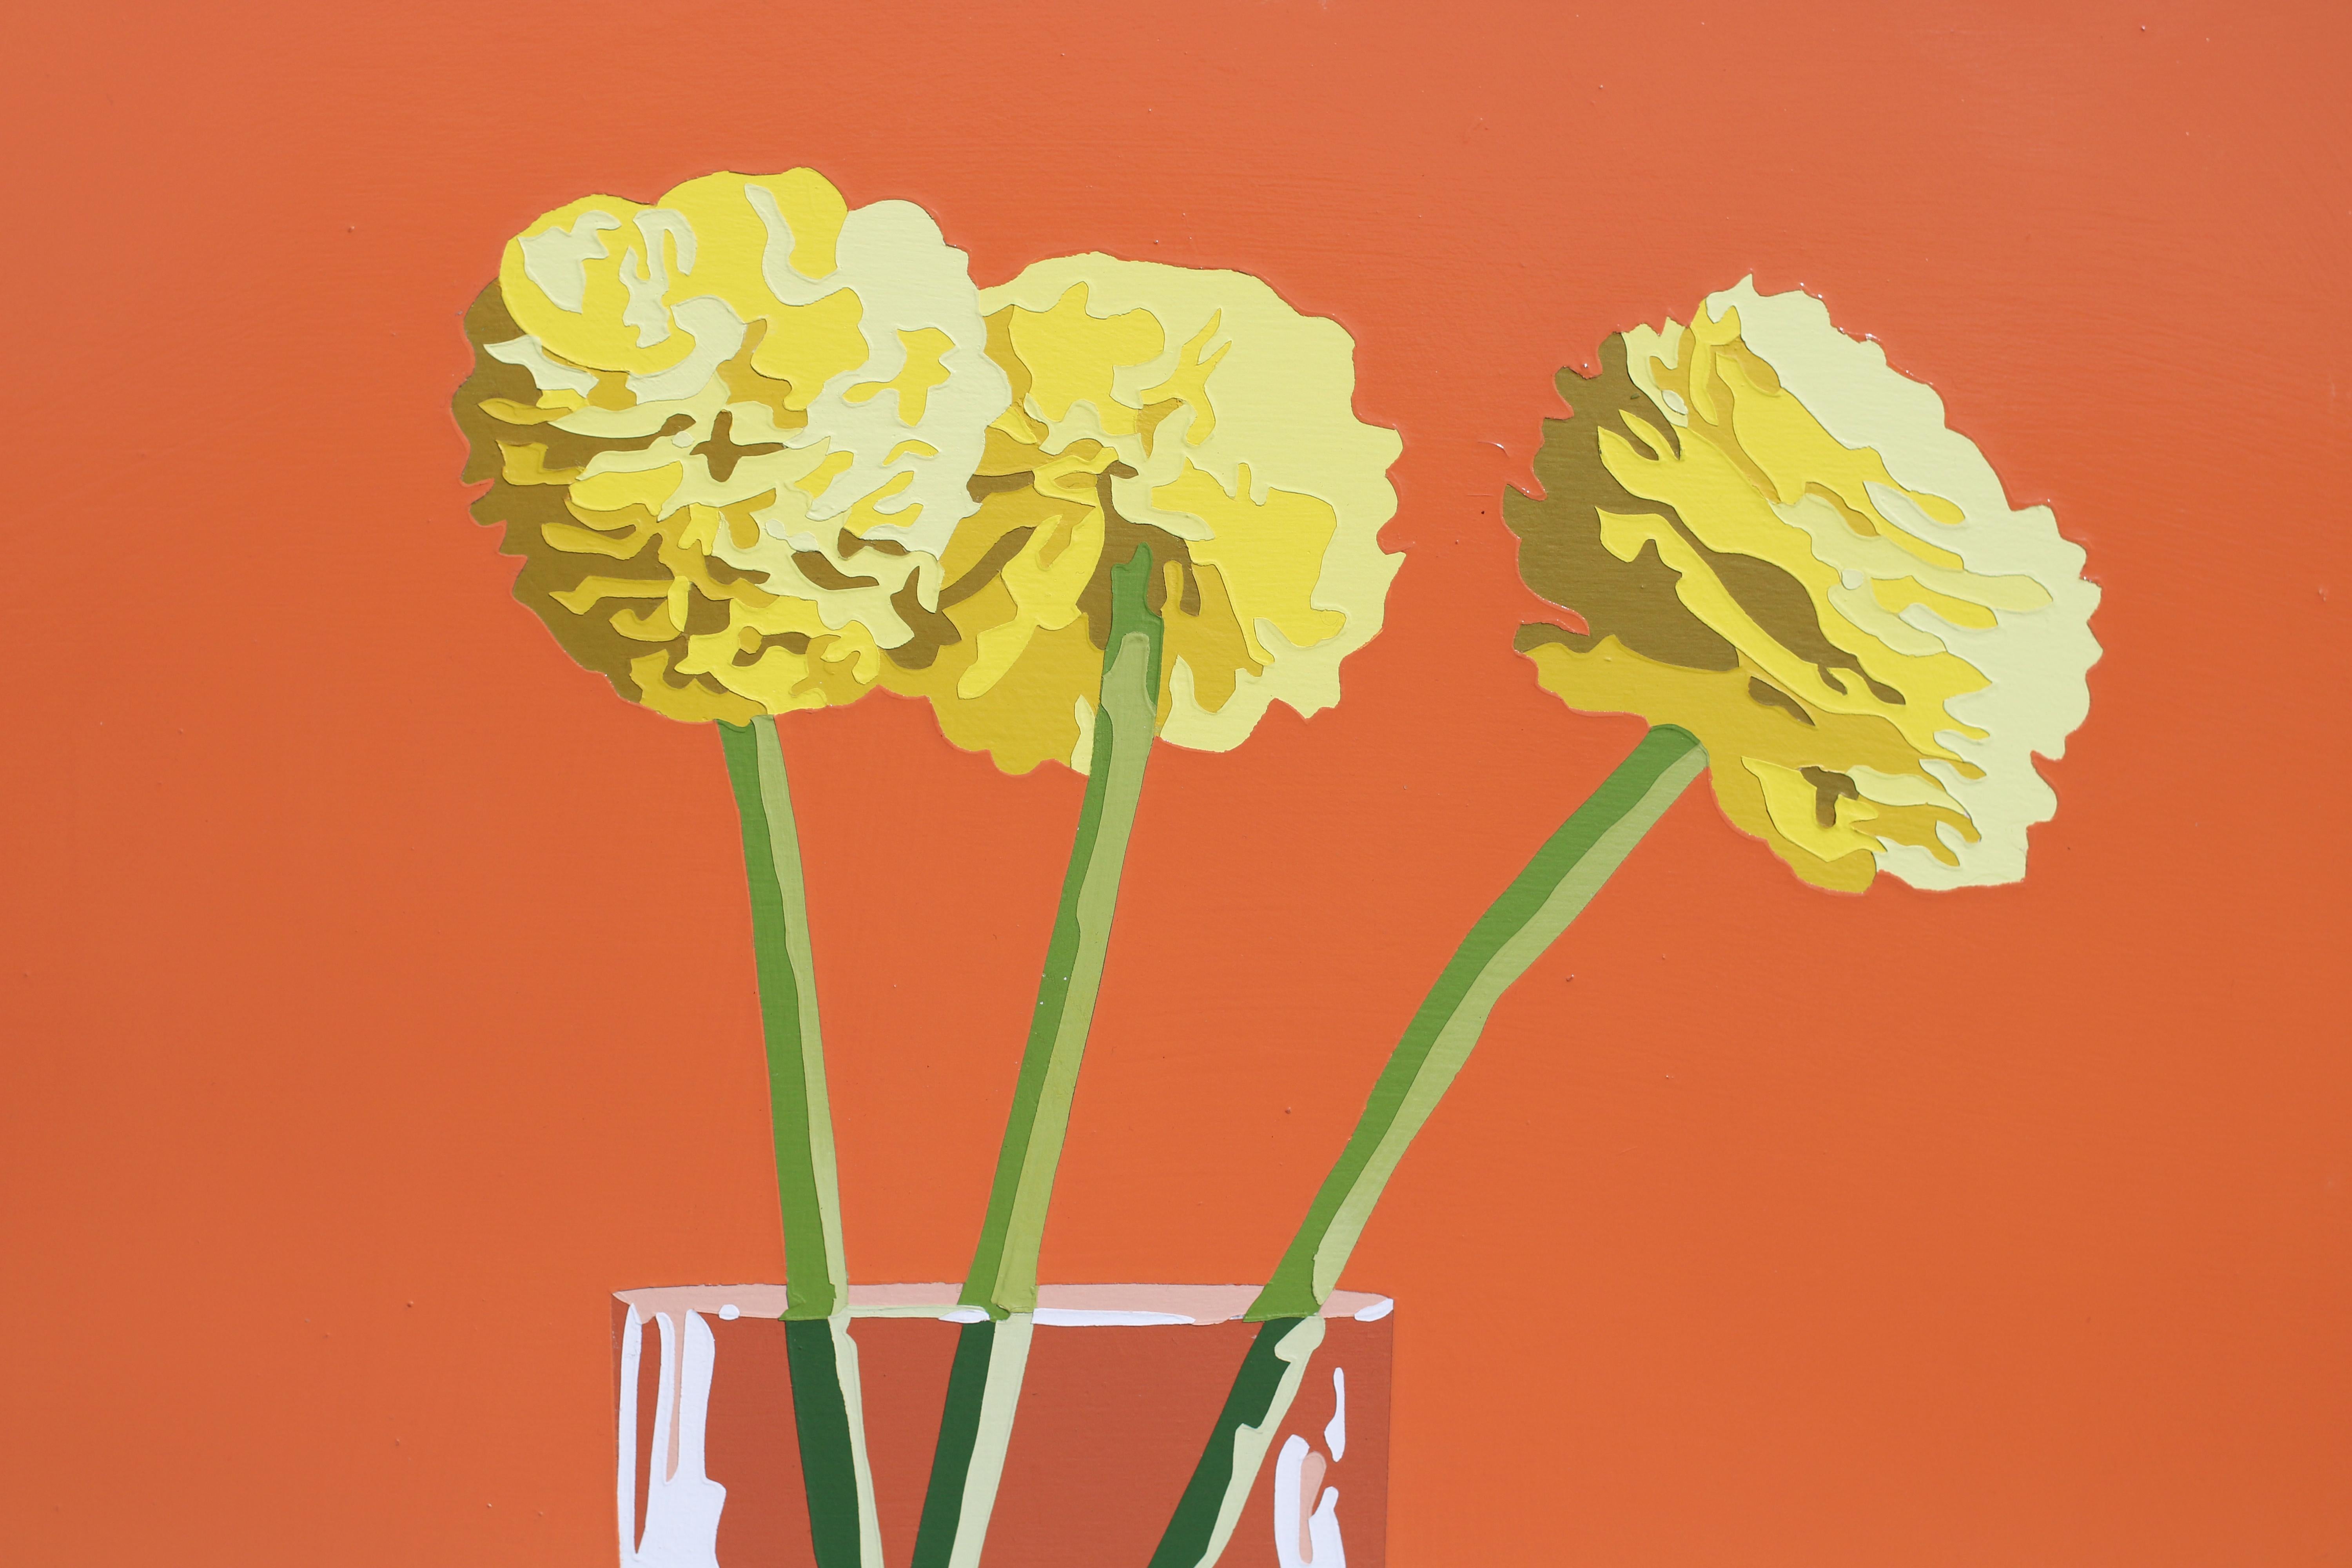 Lori Larusso, an American visual artist, explores themes of domesticity in her work, including this stunning flower painting series. By using layers of bright acrylic paint, often with high-gloss varnish, Larusso's paintings reflect on ordinary